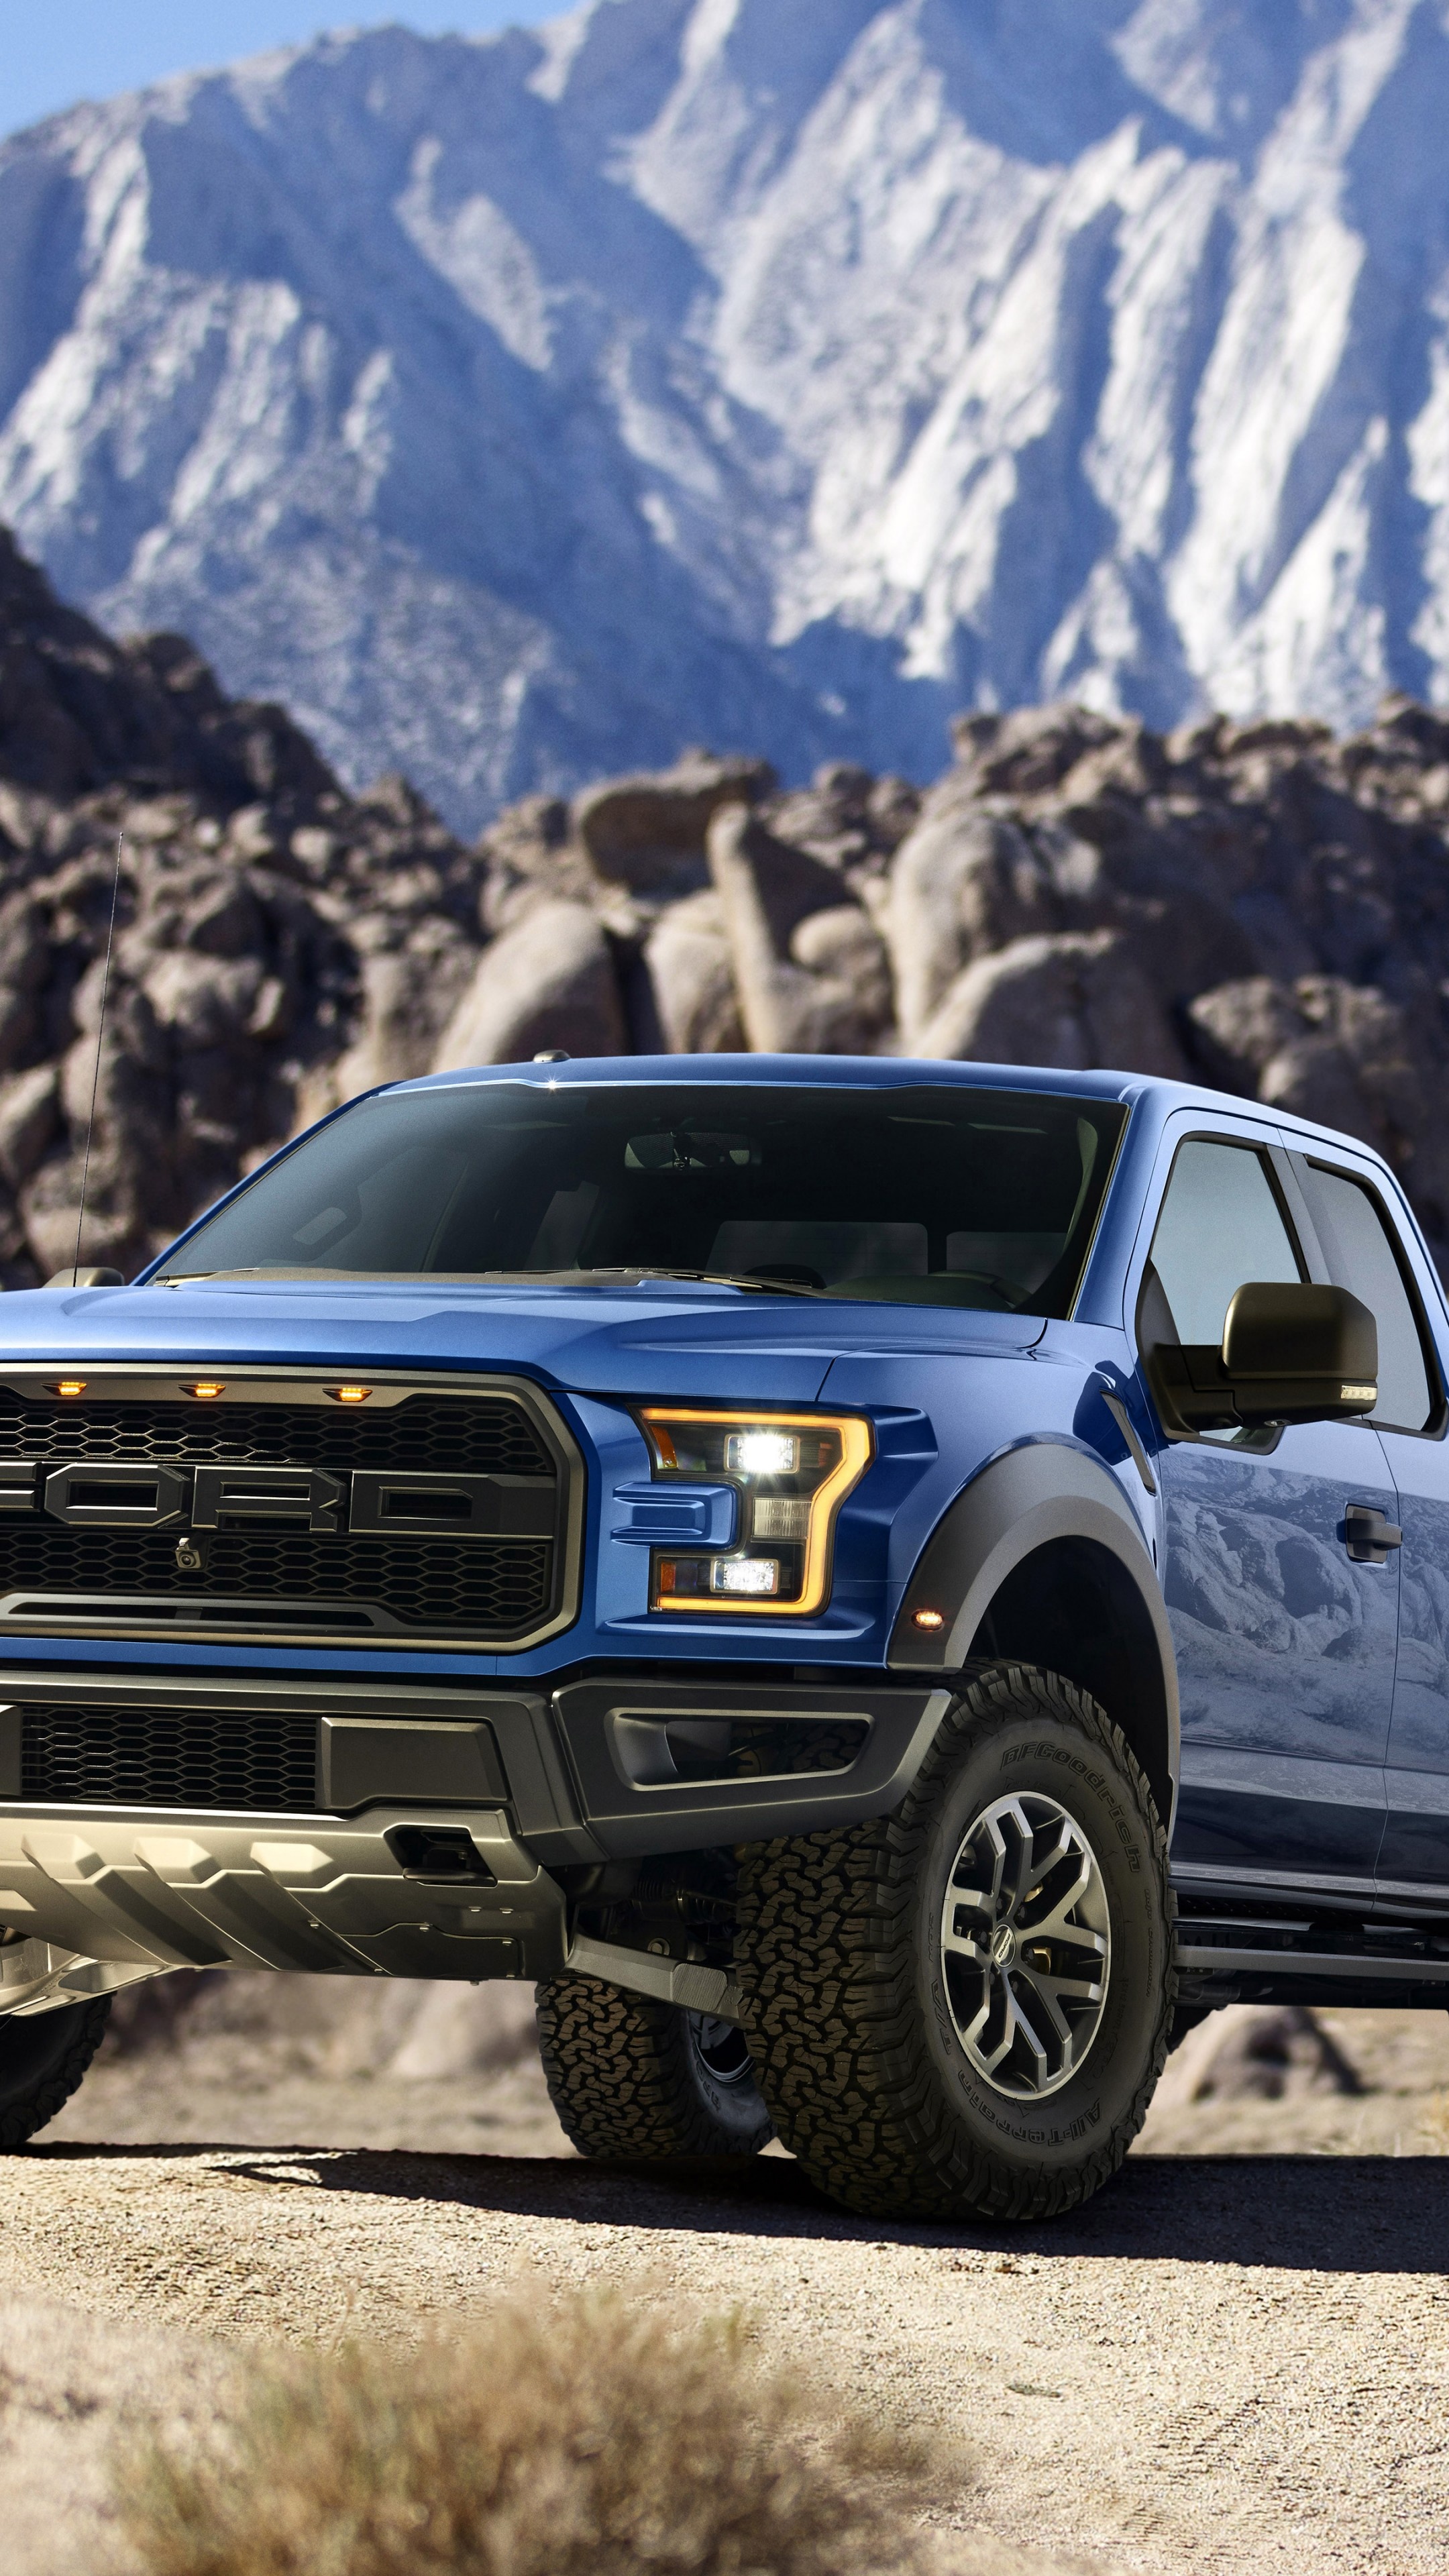 Ford Pickup: F-150 Raptor, 2015 Detroit Auto Show, Cars, Motor vehicle. 2160x3840 4K Background.